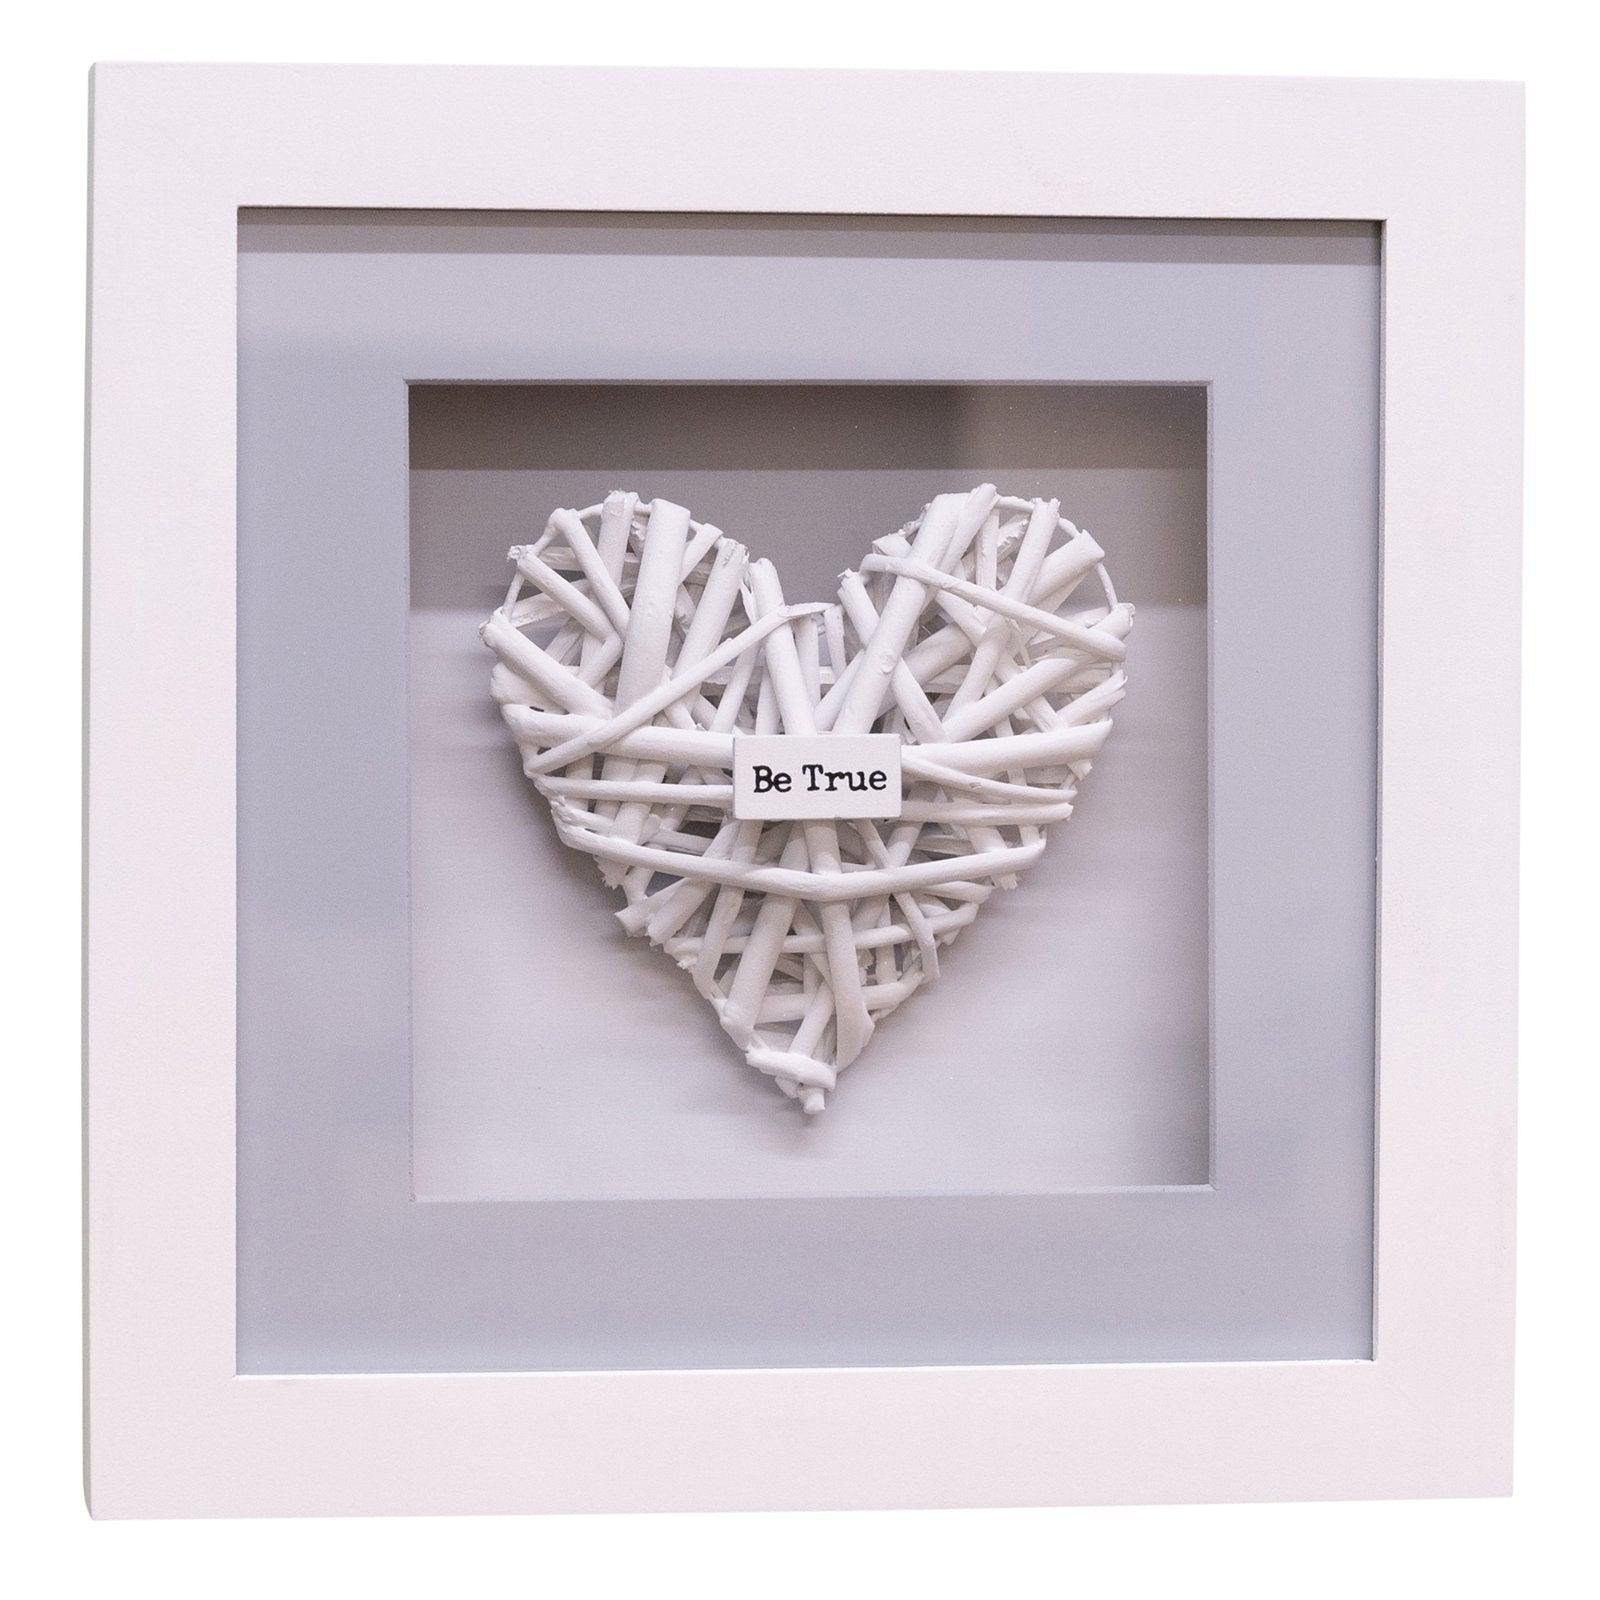 View Set of 4 Be Kind Woven Heart Frames information